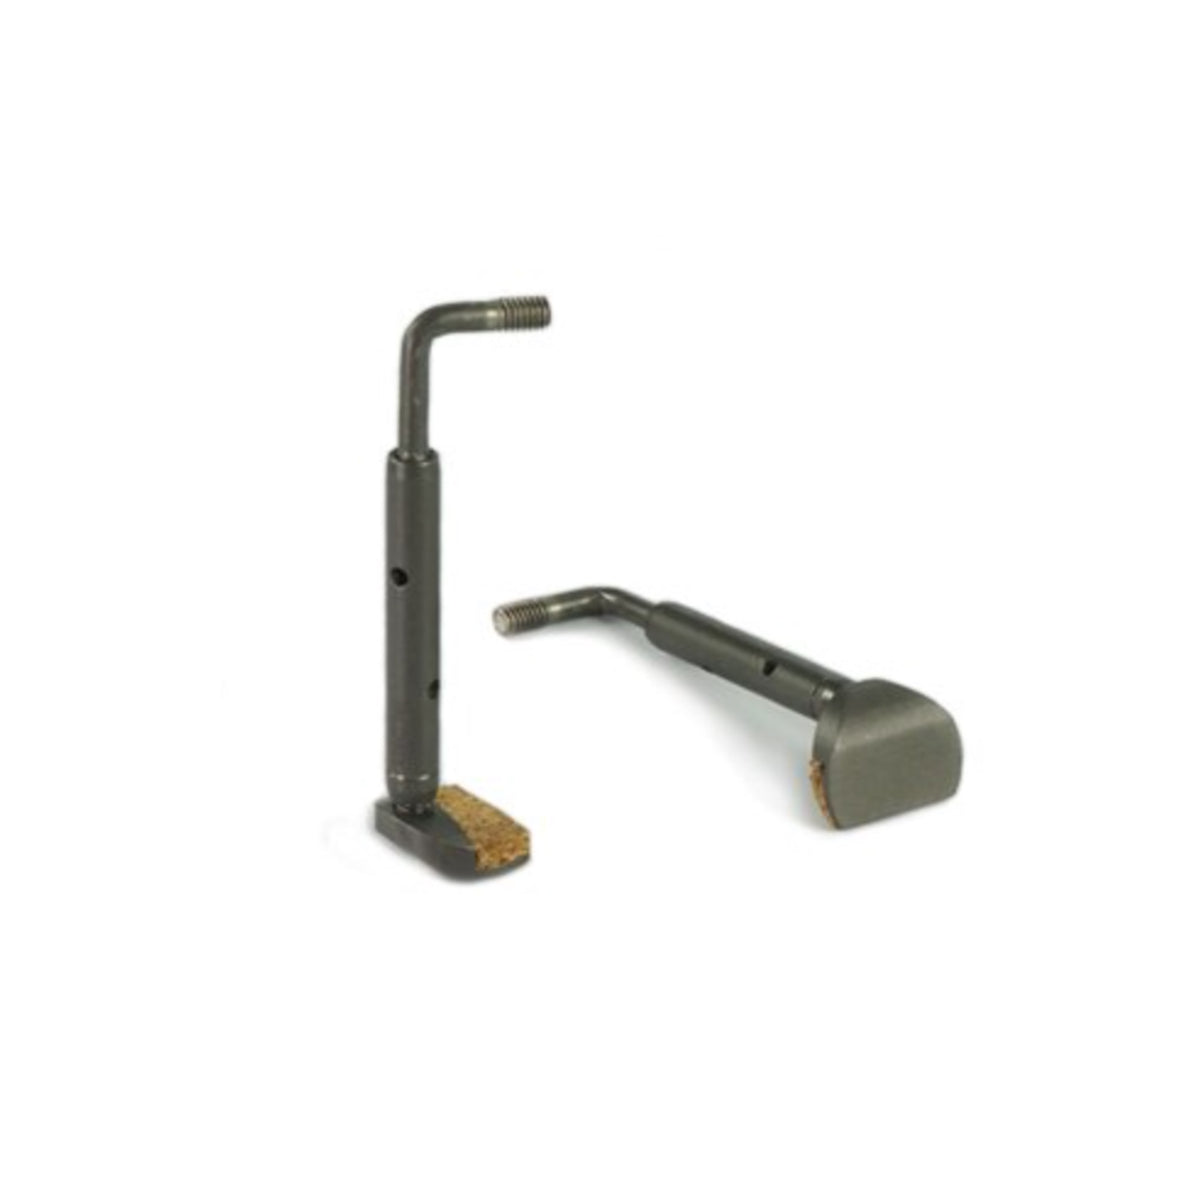 Titanium Hook Hardware Replacement for Chinrest - Universal Separated Leg Design